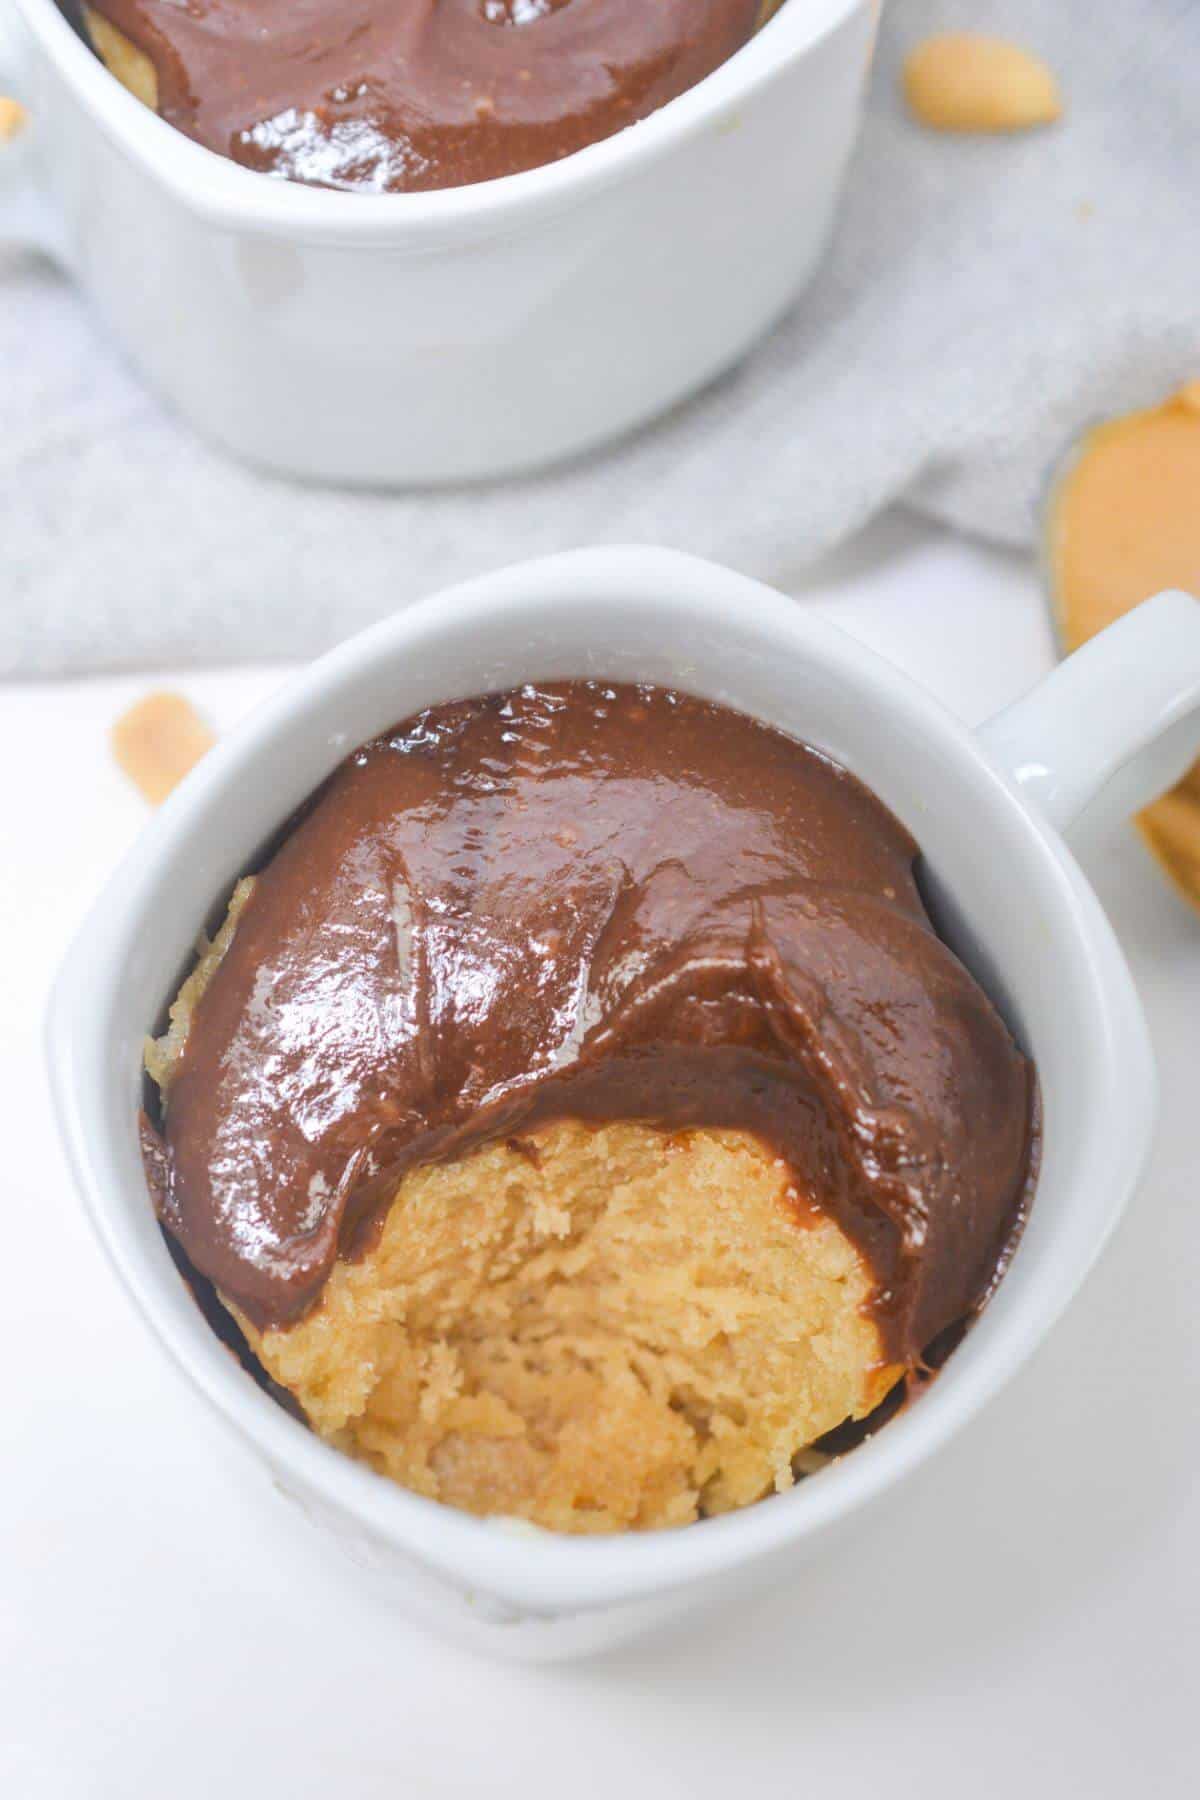 Chocolate frosted peanut butter mug cake with bite missing.